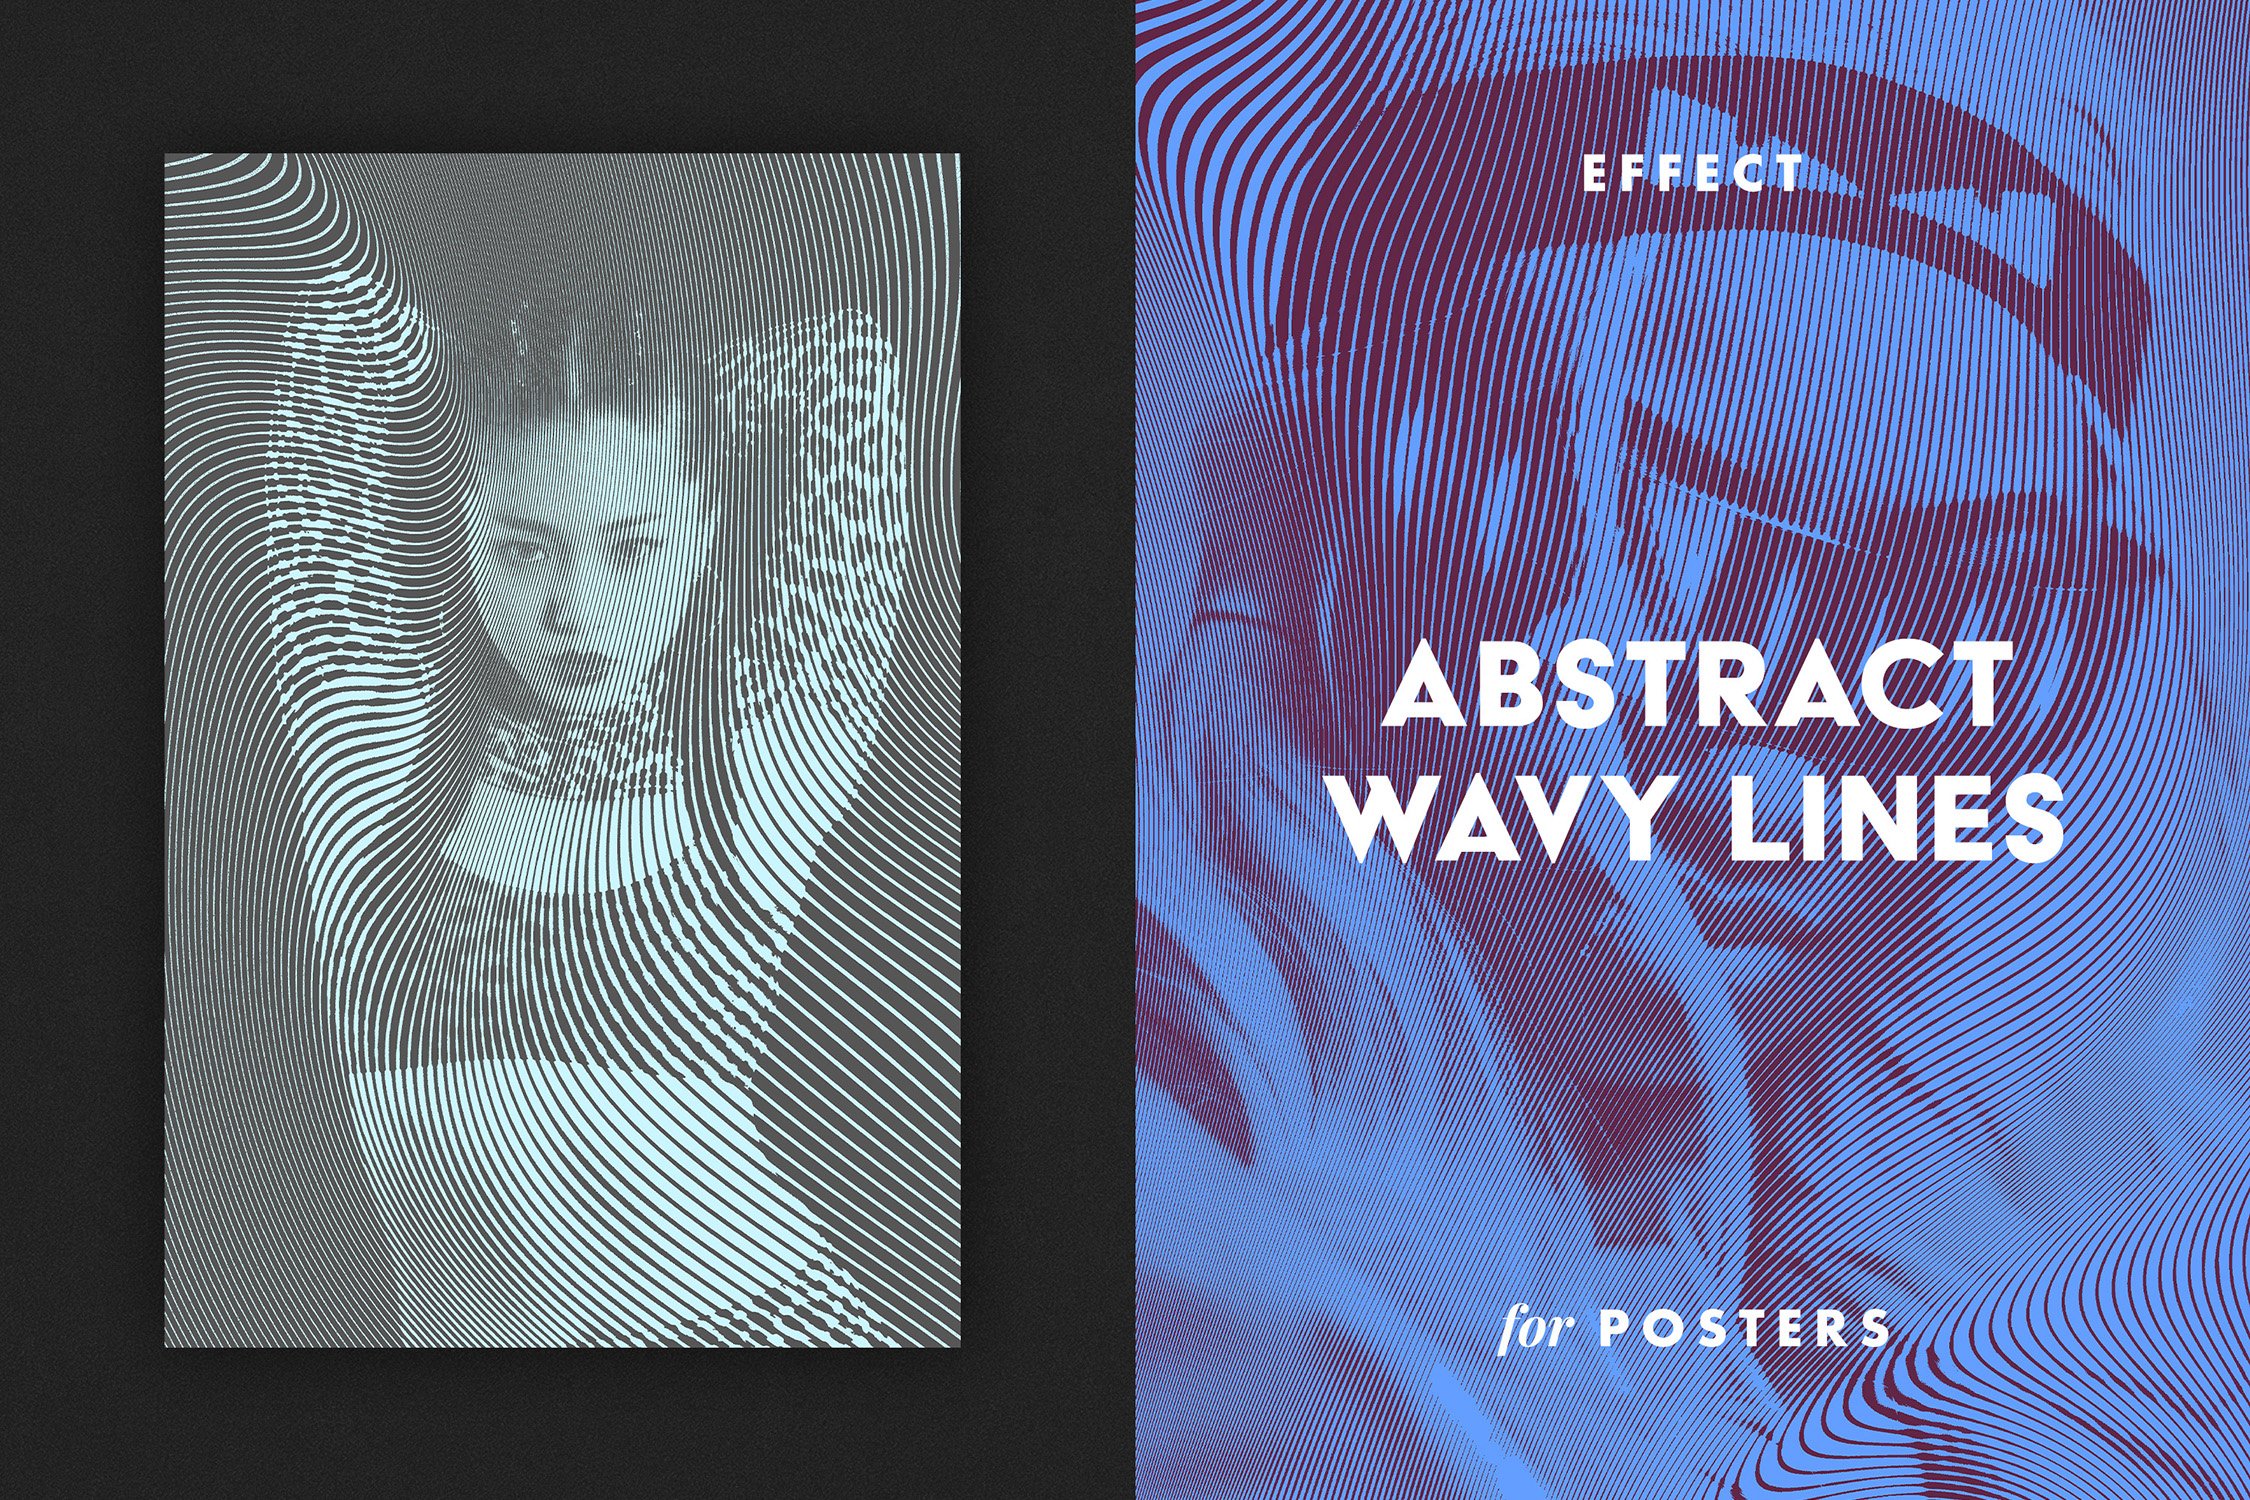 wavy lines effect for posters 01 376